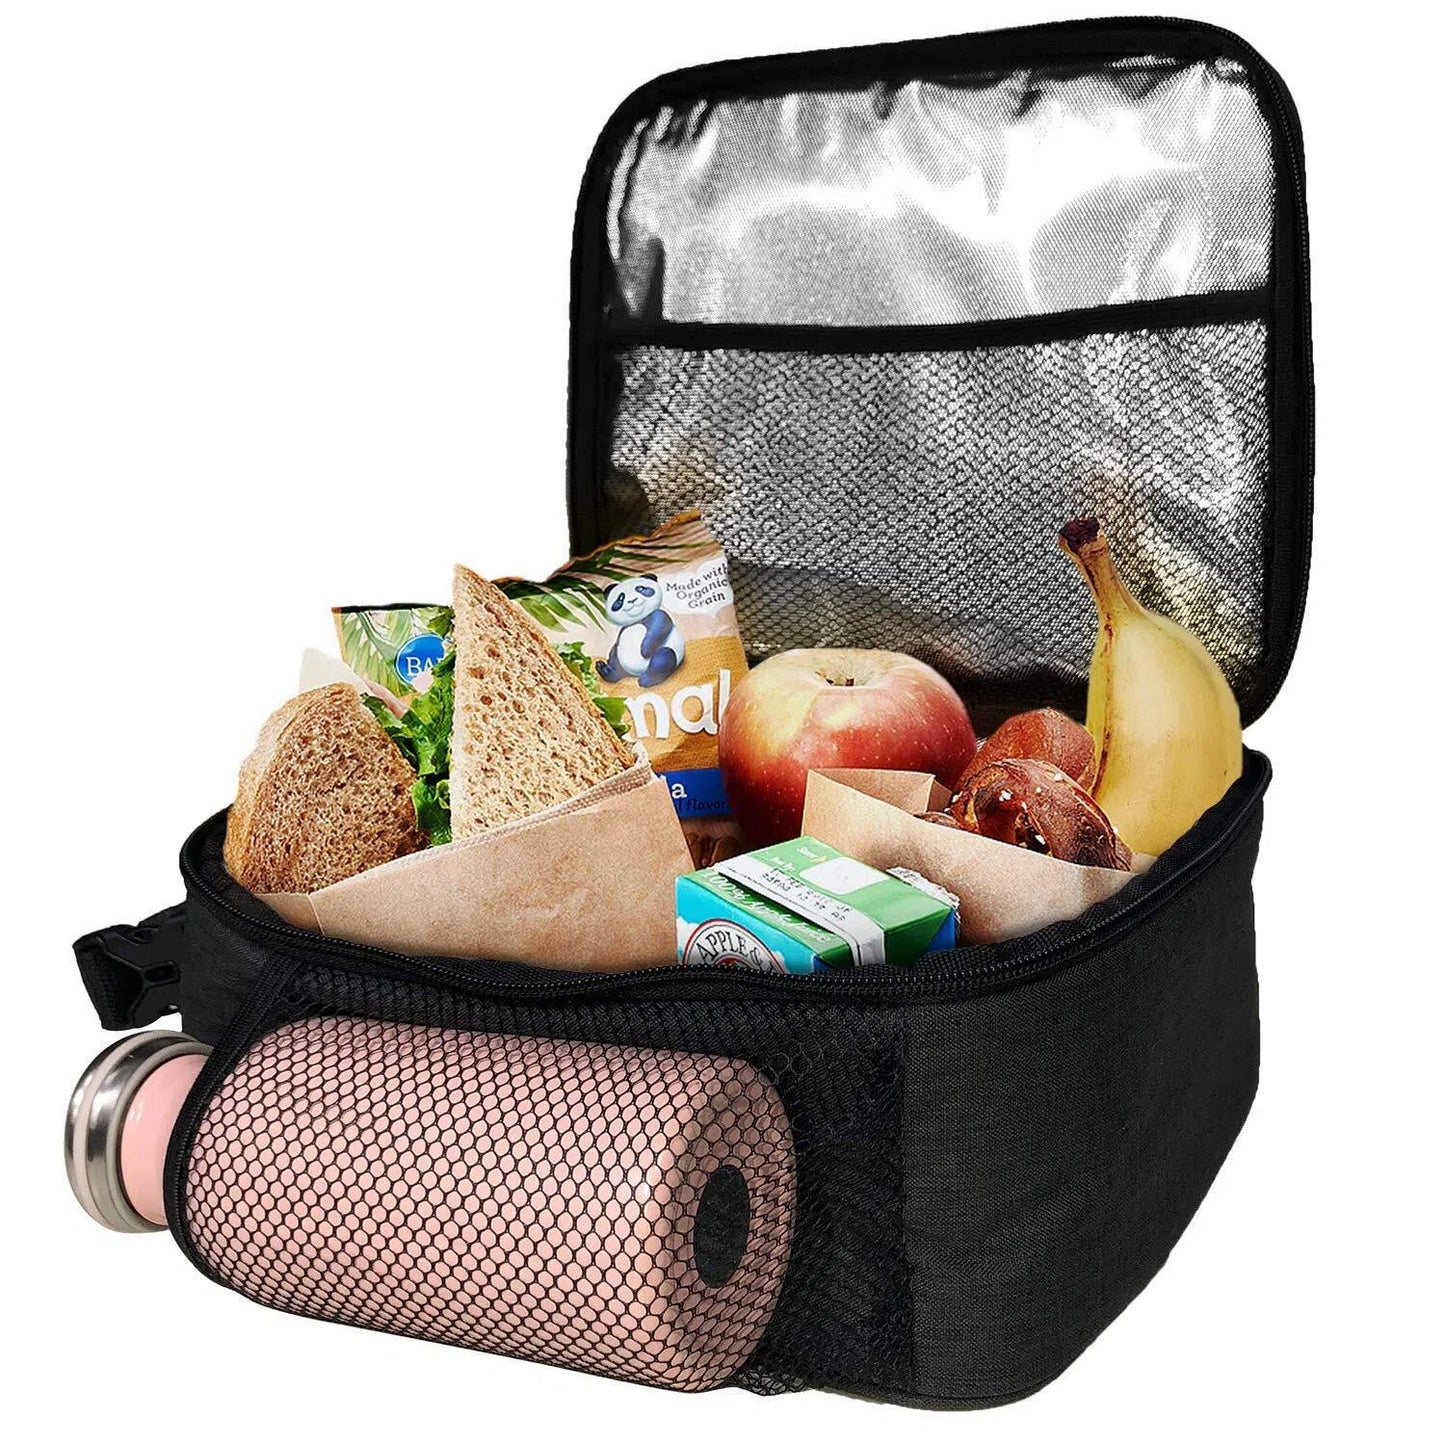 Insulated Lunch Box for Men/Women/Kids/Boys/Girls/Adults, Reusable Lunch Bag, Tough & Spacious Adult Lunchbox (18654-G)